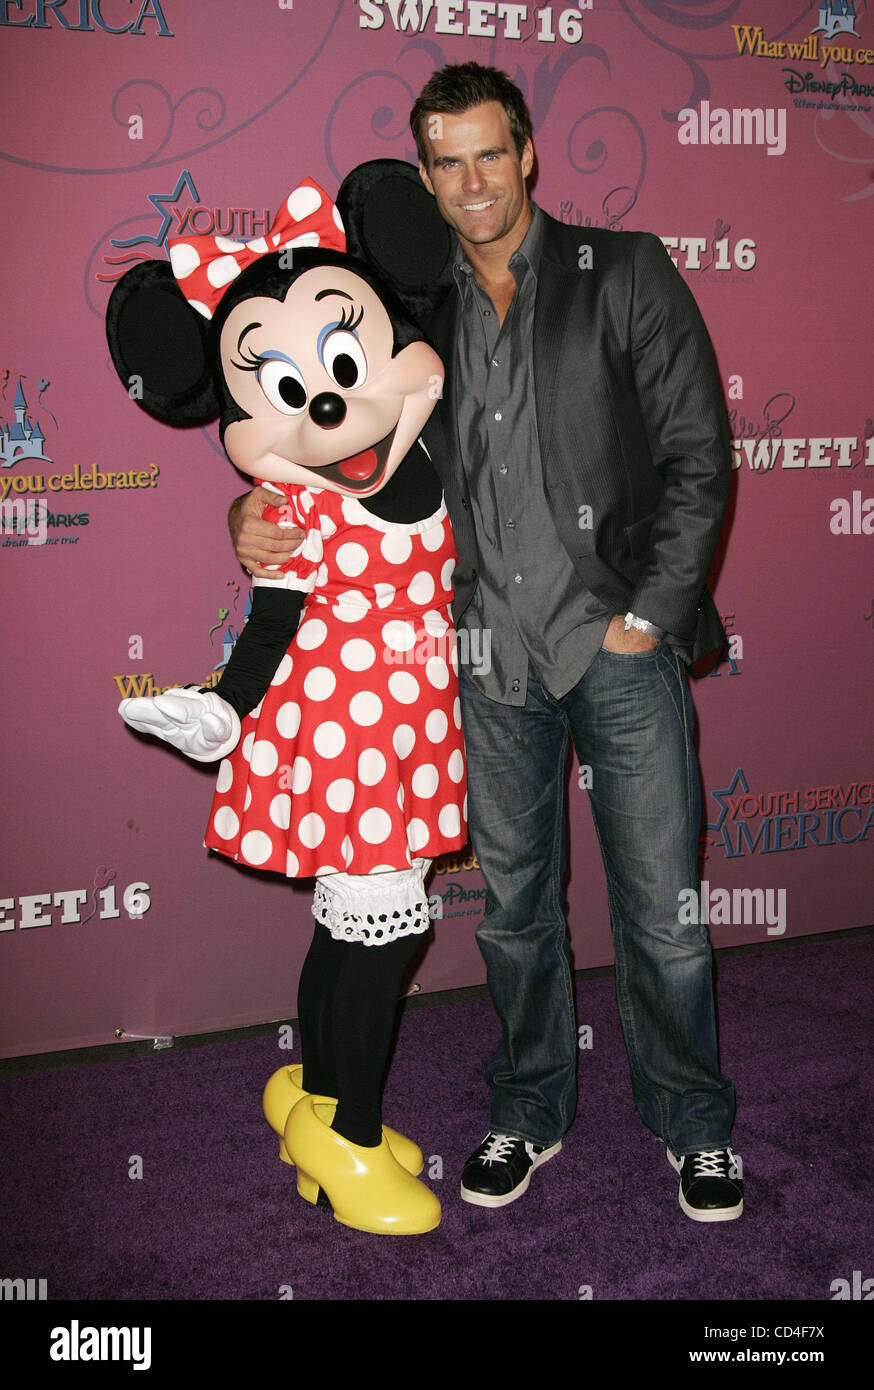 Oct 05, 2008 - Anaheim, California, USA - CAMERON MATHISON with MINNIE MOUSE at the Miley Cyrus Sweet 16 Birthday Party held at Disneyland in Anaheim. (Credit Image: © Lisa O'Connor/ZUMA Press) Stock Photo